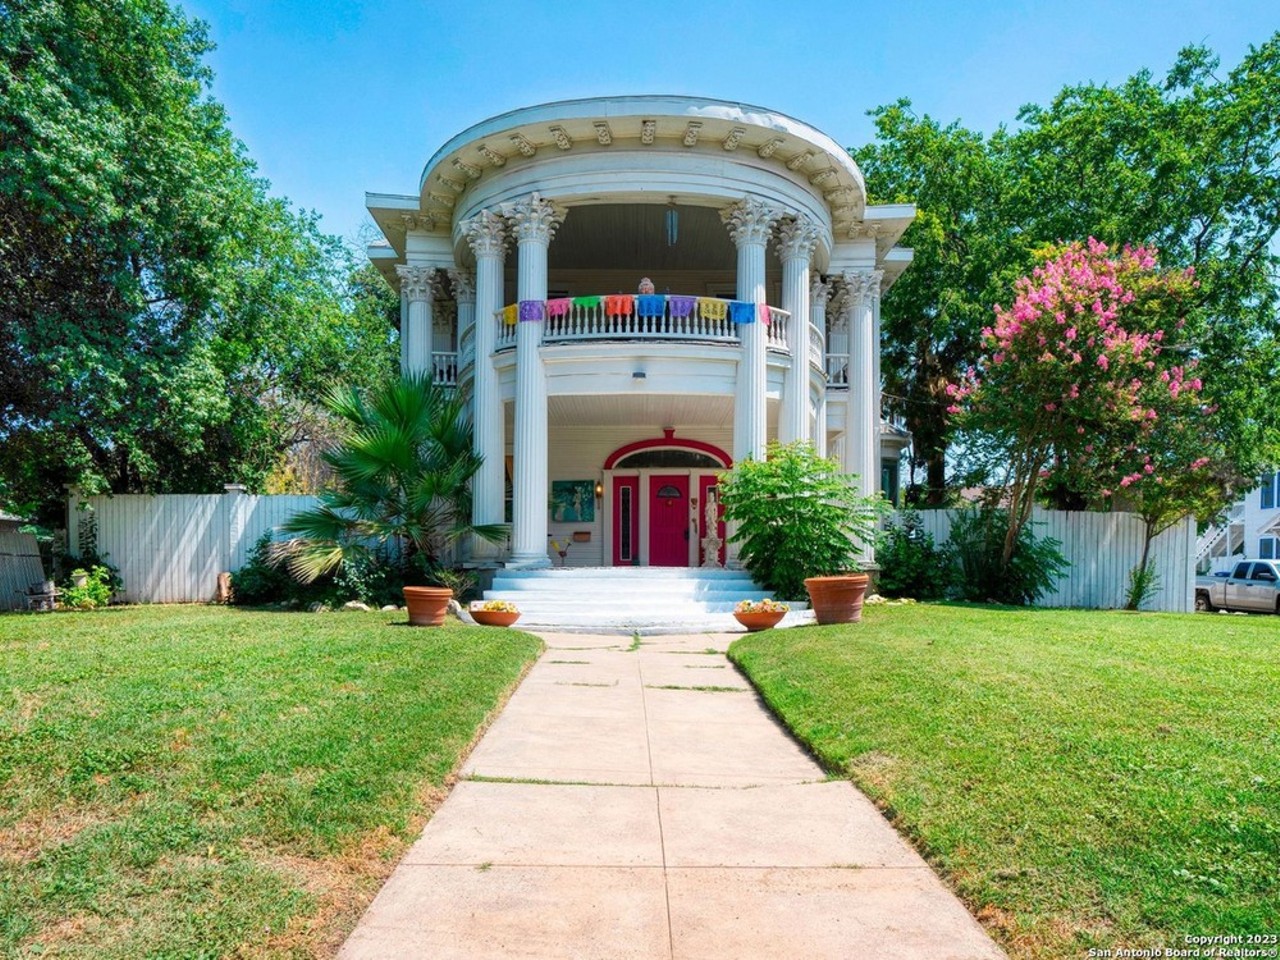 A 1920 San Antonio mansion of produce magnate Richard Pruitt is for sale